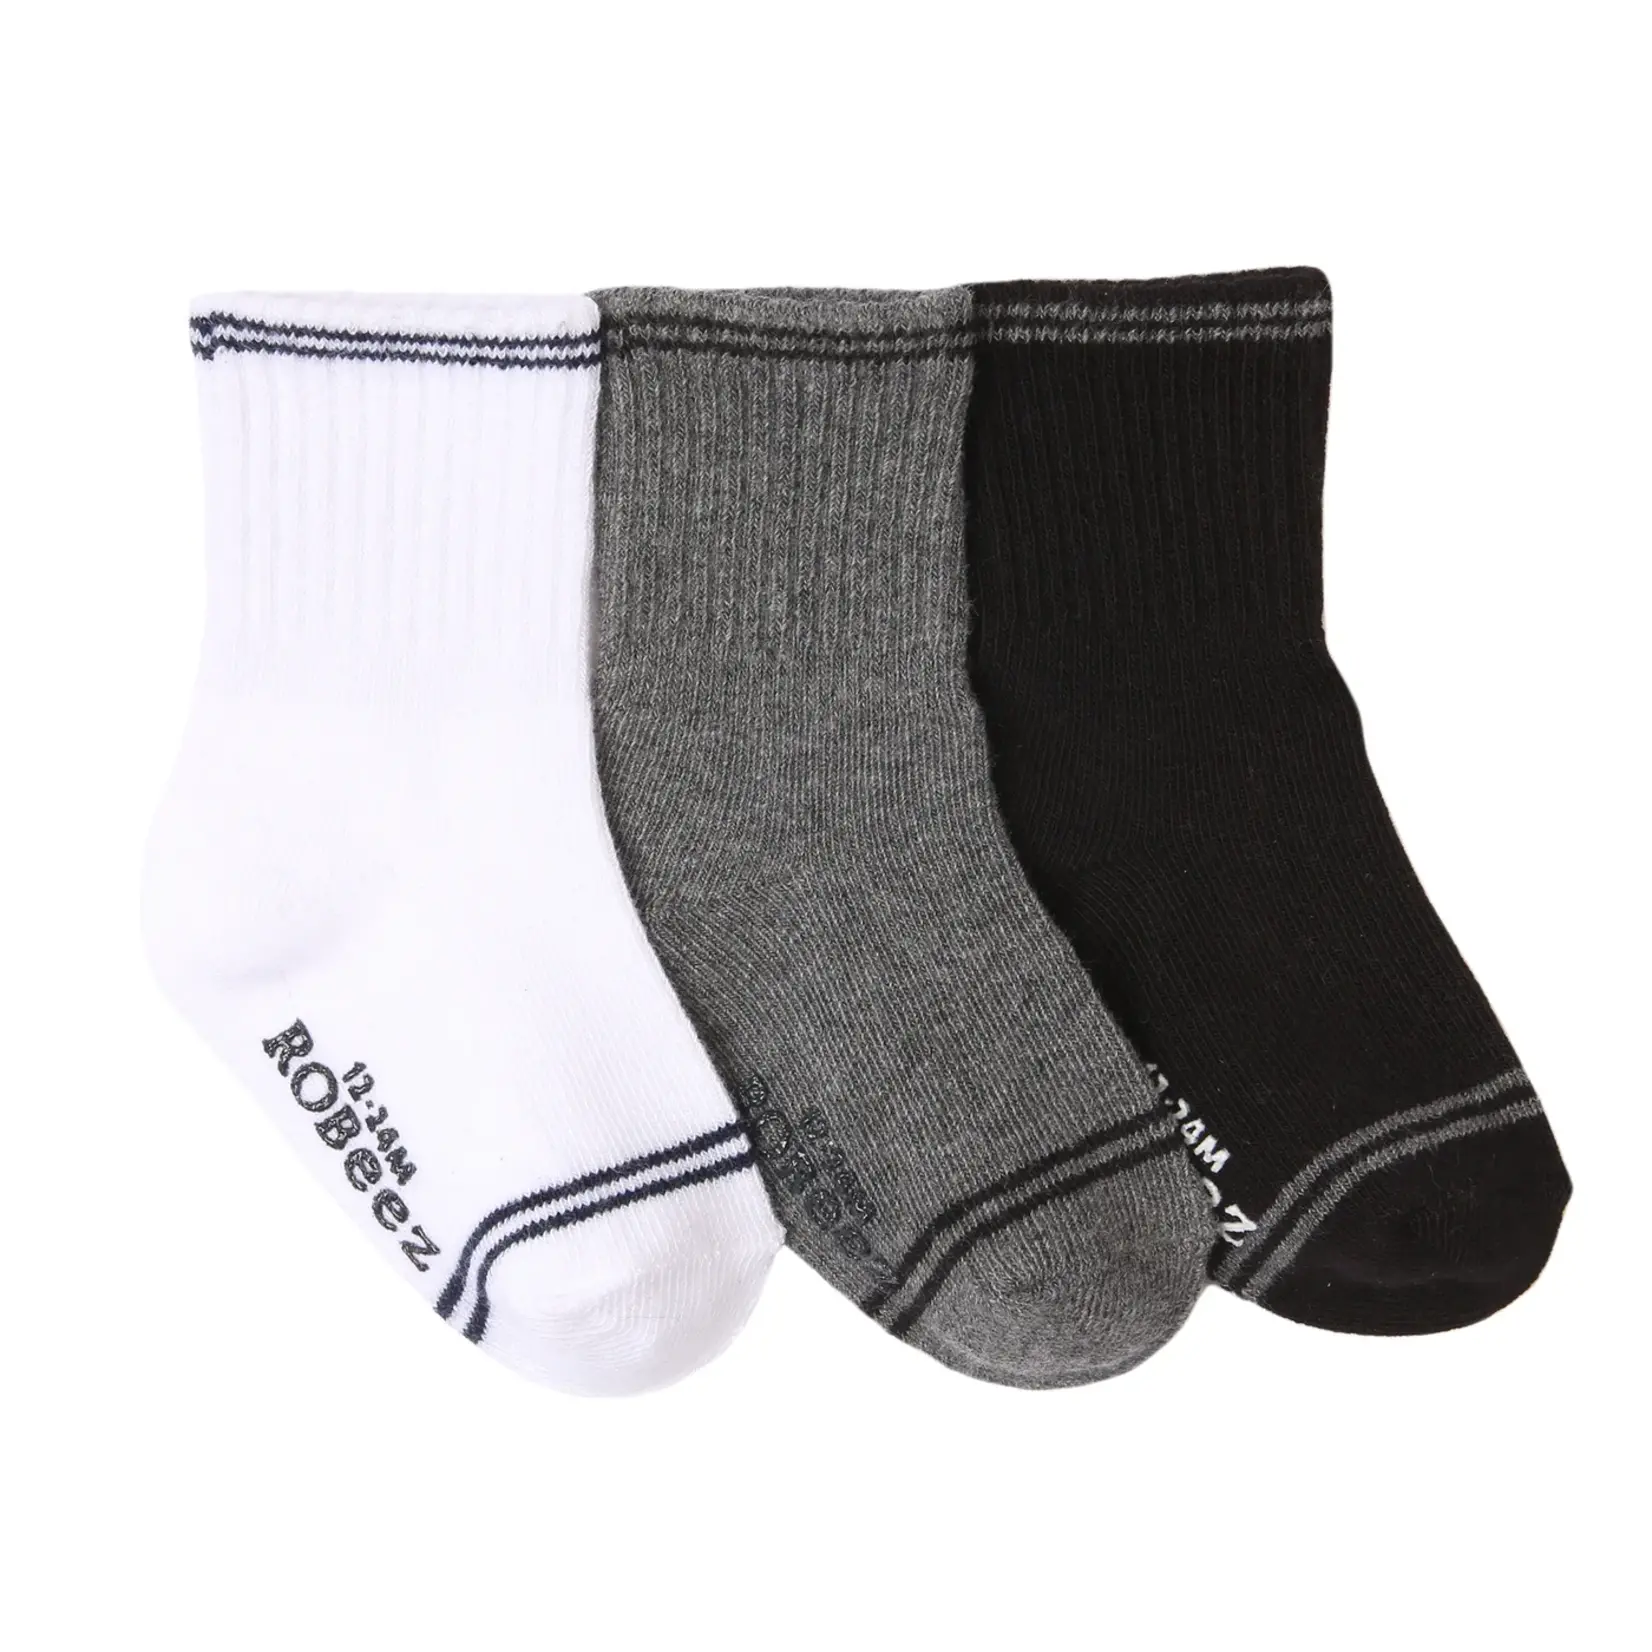 Robeez ROBEEZ SOCKS 3PK GOES WITH EVERYTHING